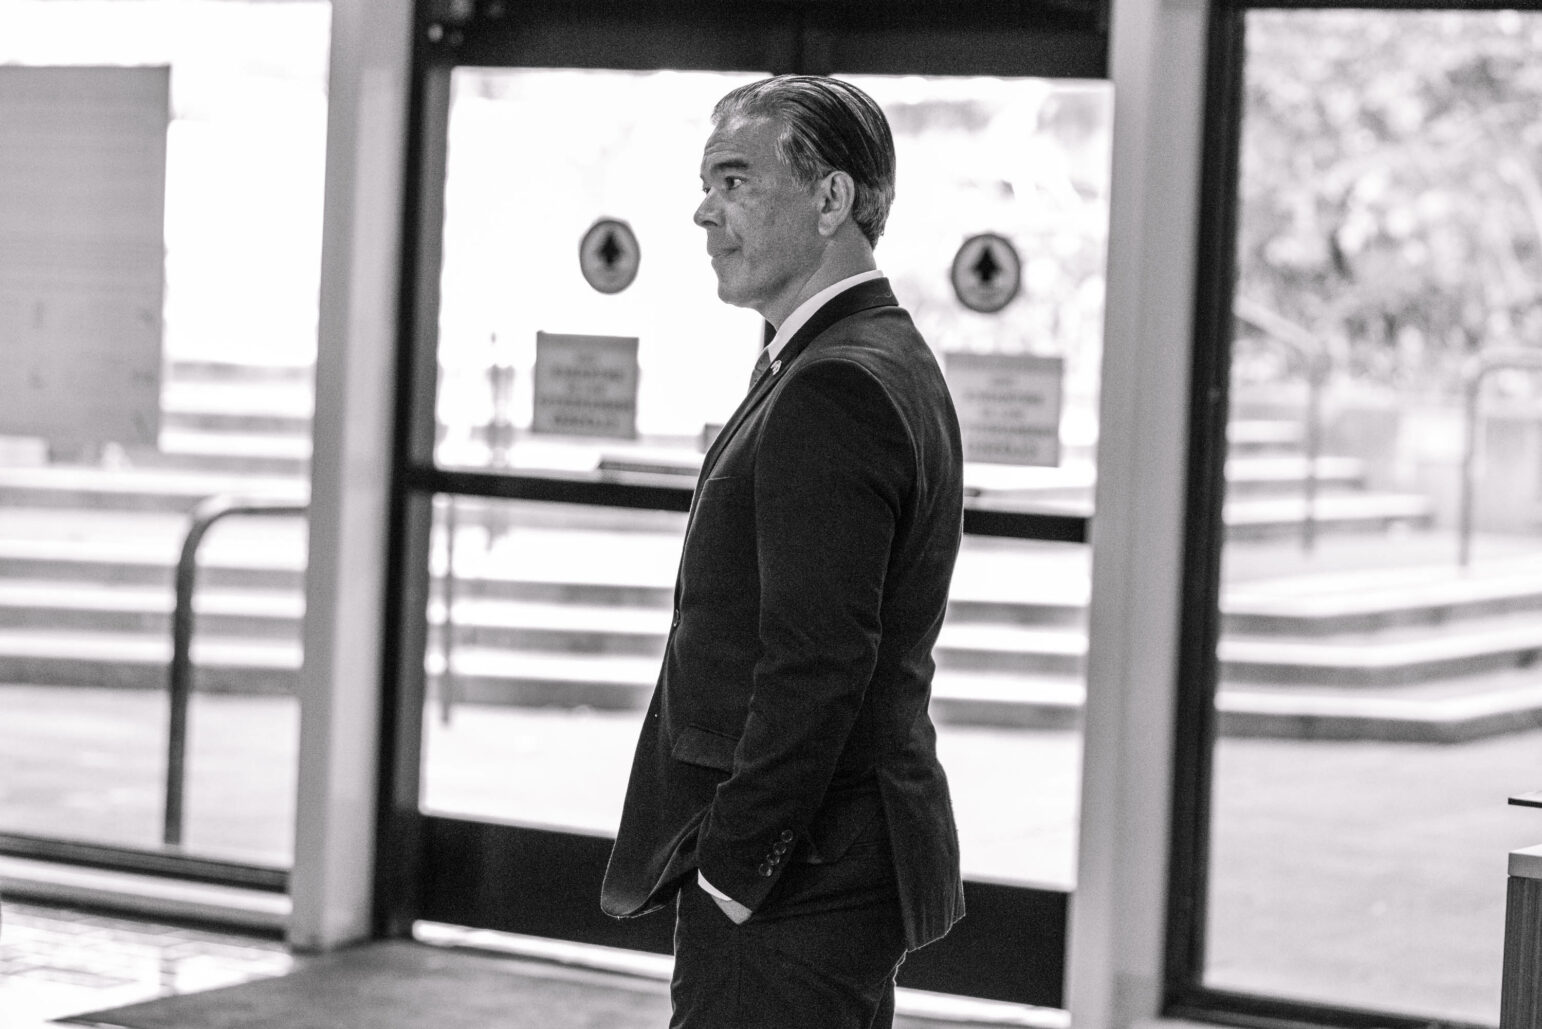 Black and white photo of California Attorney General Rob Bonta standing in profile in an indoor setting. He's wearing a dark suit and a light blue tie, with a lapel pin on his jacket. He appears focused, looking off into the distance with a pensive expression. The background is an out-of-focus view of a public building entrance, with doors and directional signs slightly visible, casting soft natural light on the subject.